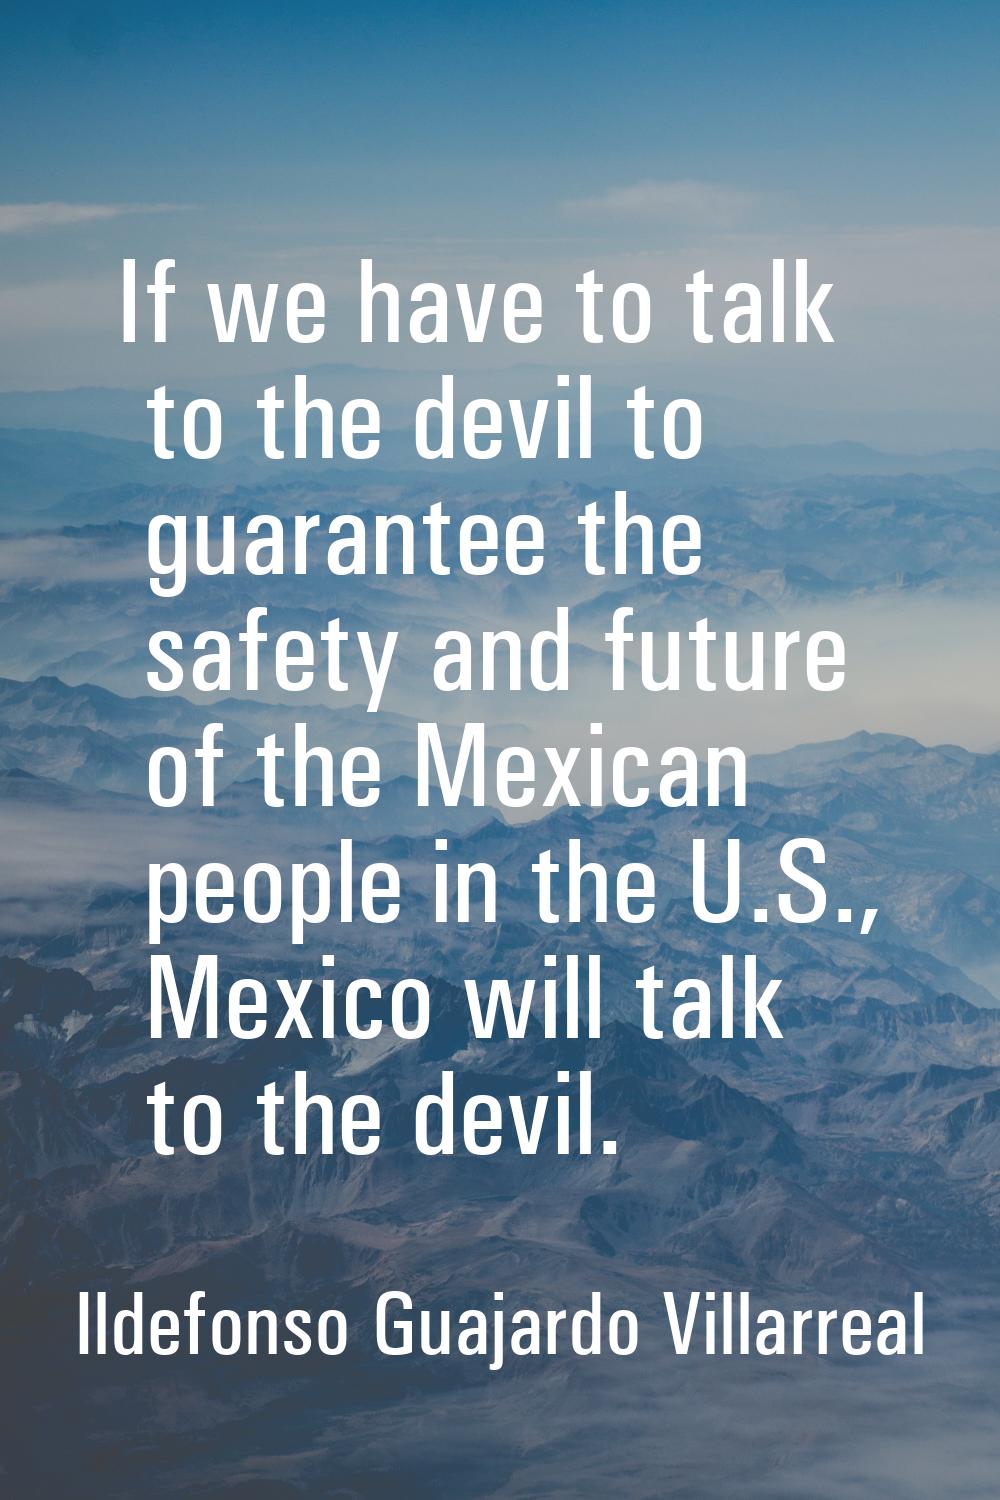 If we have to talk to the devil to guarantee the safety and future of the Mexican people in the U.S